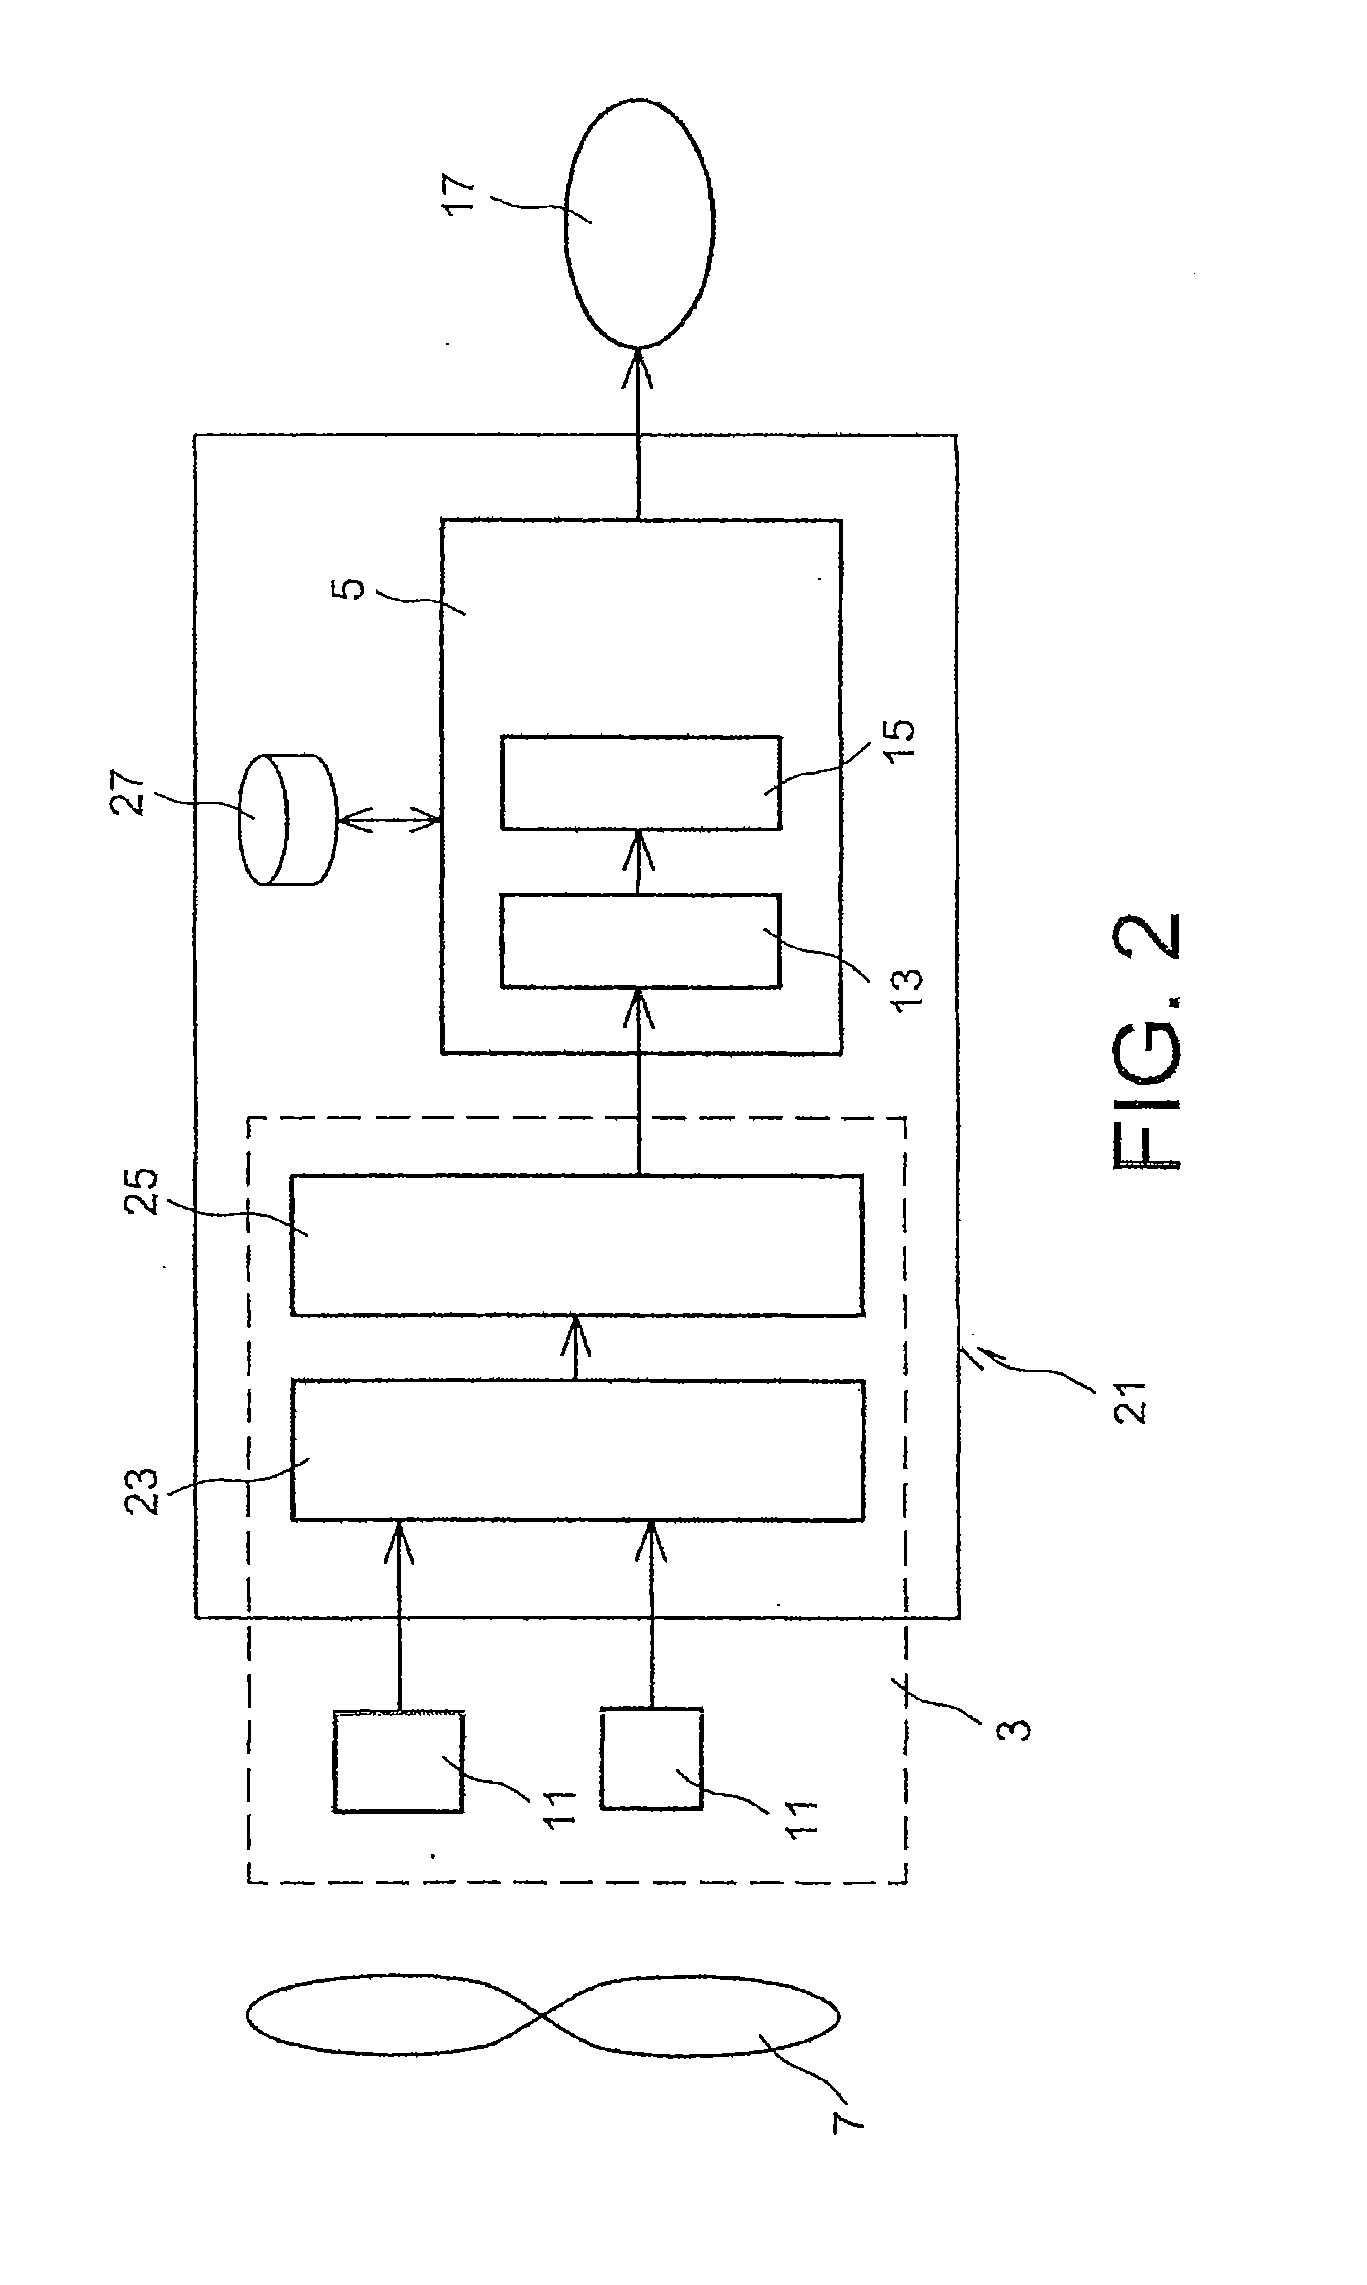 System for detecting an impact on an aircraft engine impeller wheel